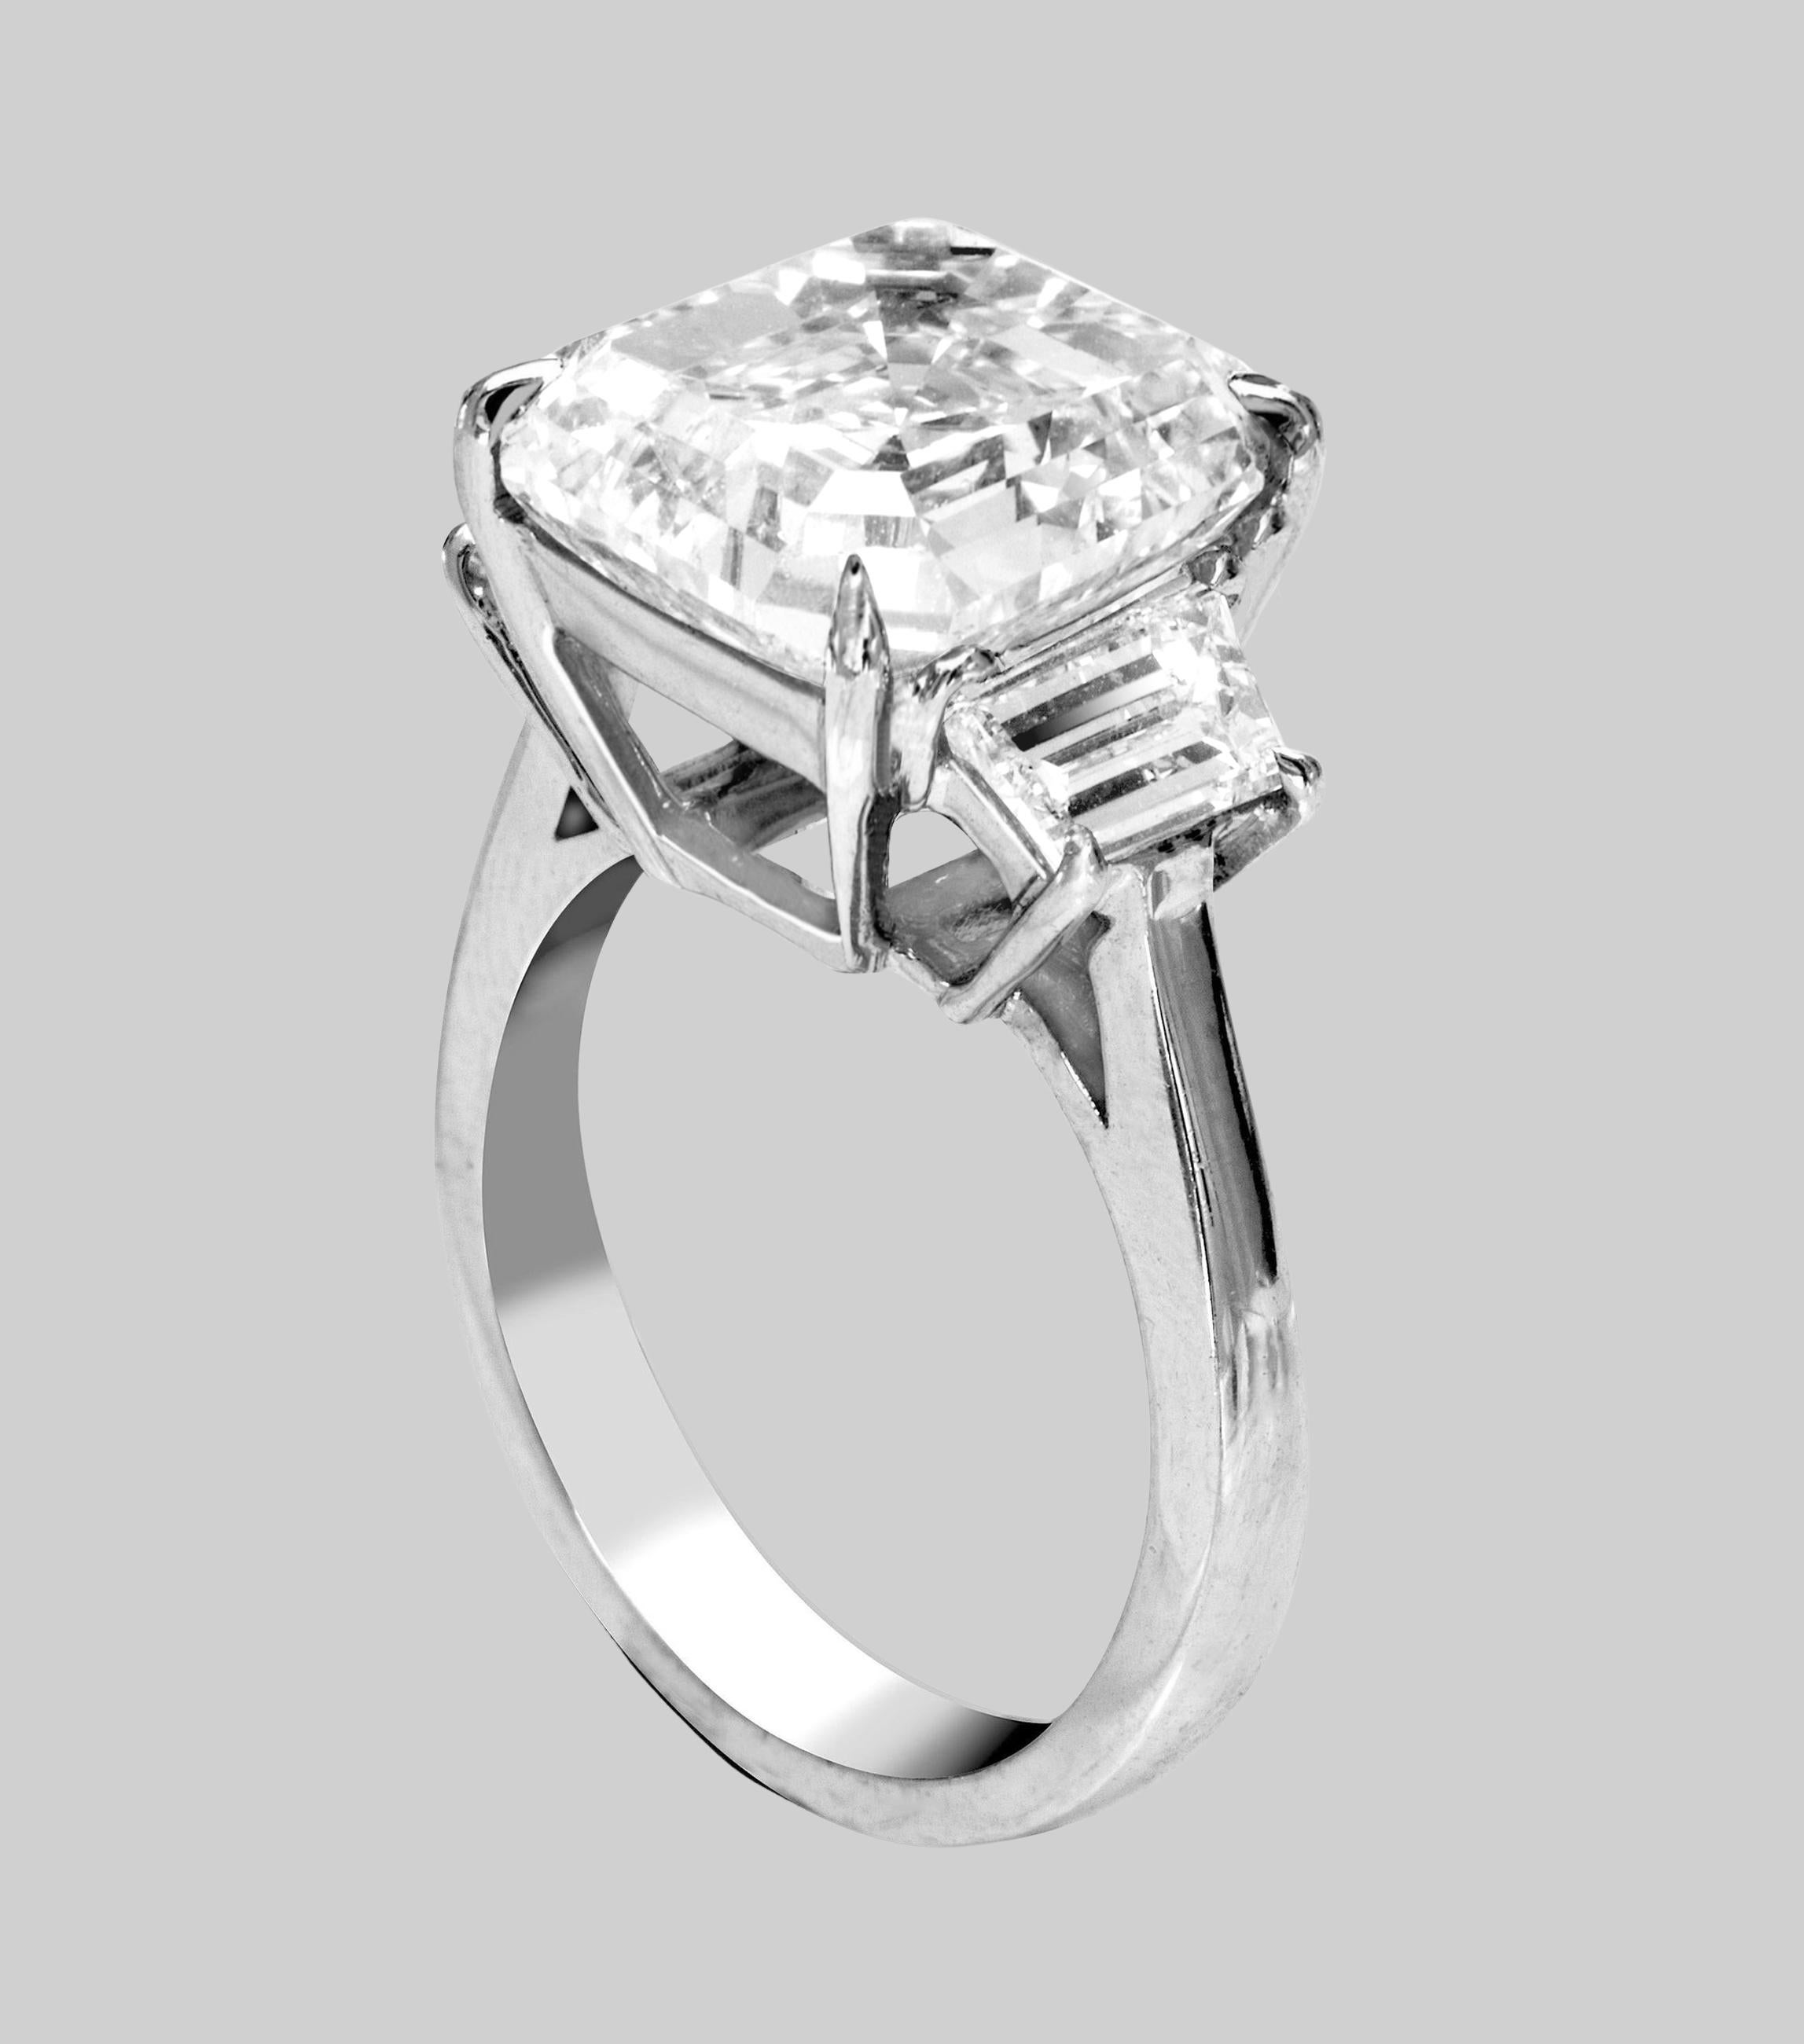 3 Carat Asscher cut Diamond shouldered by trapezoid diamonds on a platinum band.
Accompanied by Gia Report stating that the diamond is D Flawless!

handmade by Antinori di Sanpietro, our core business is large, high quality white and fancy-colored